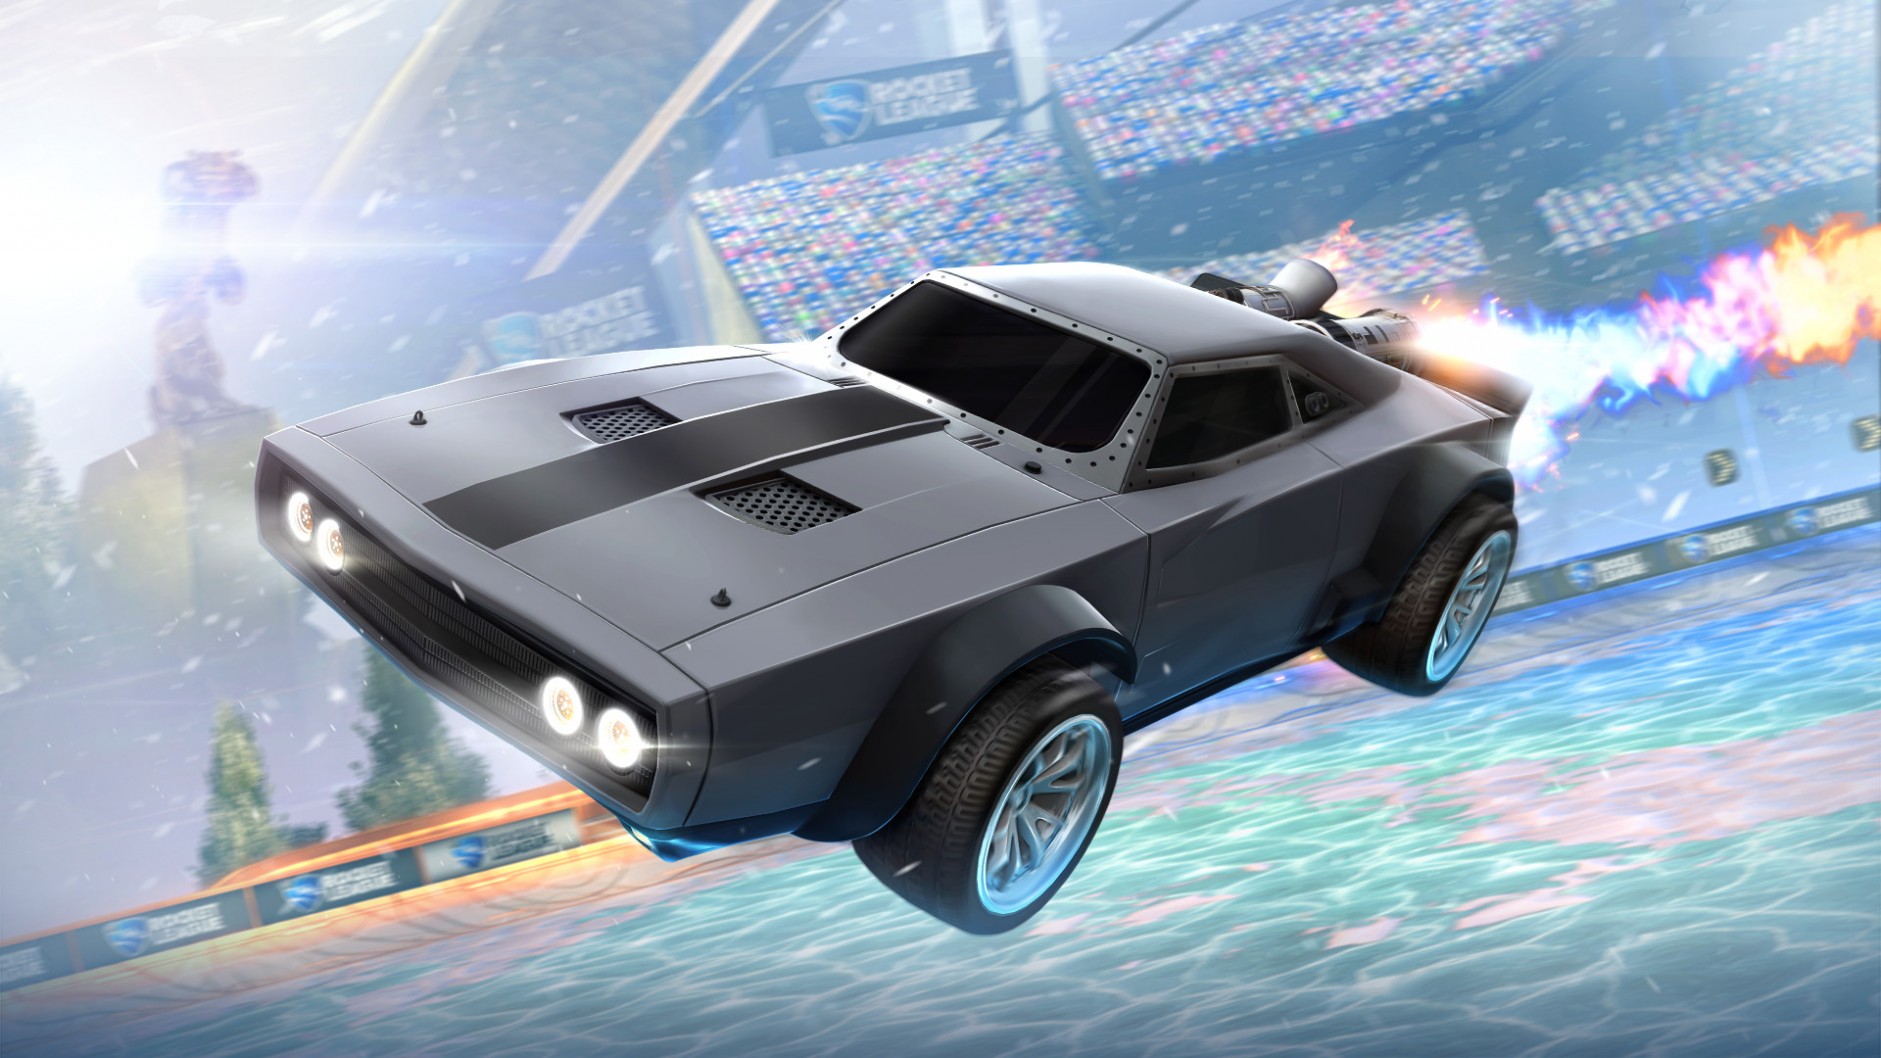 Rocket League The Fate of the Furious Features